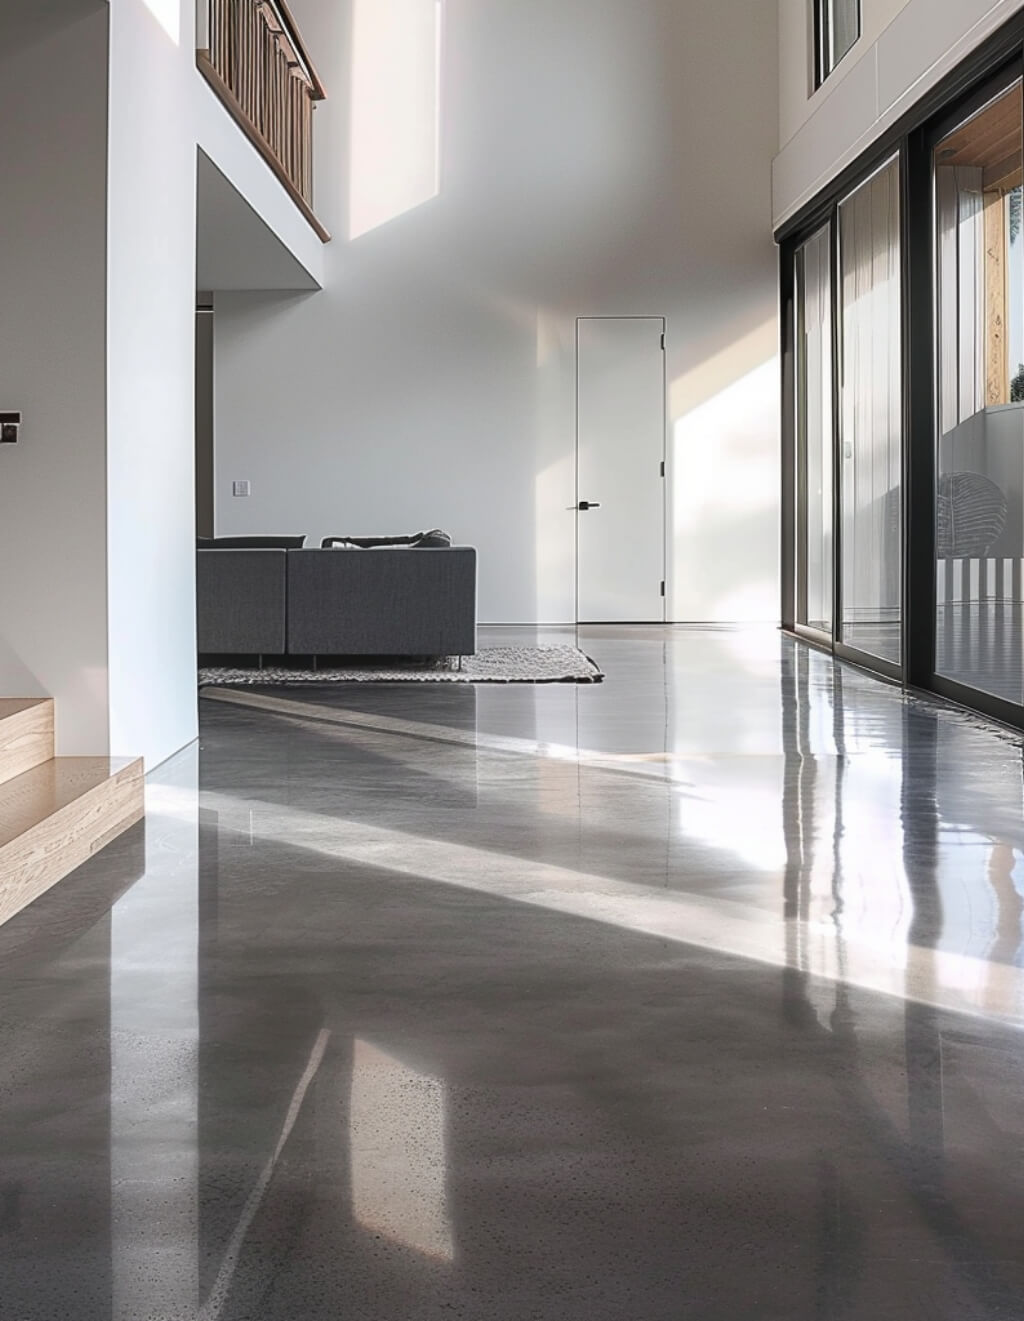 Polished concrete floor in residential space